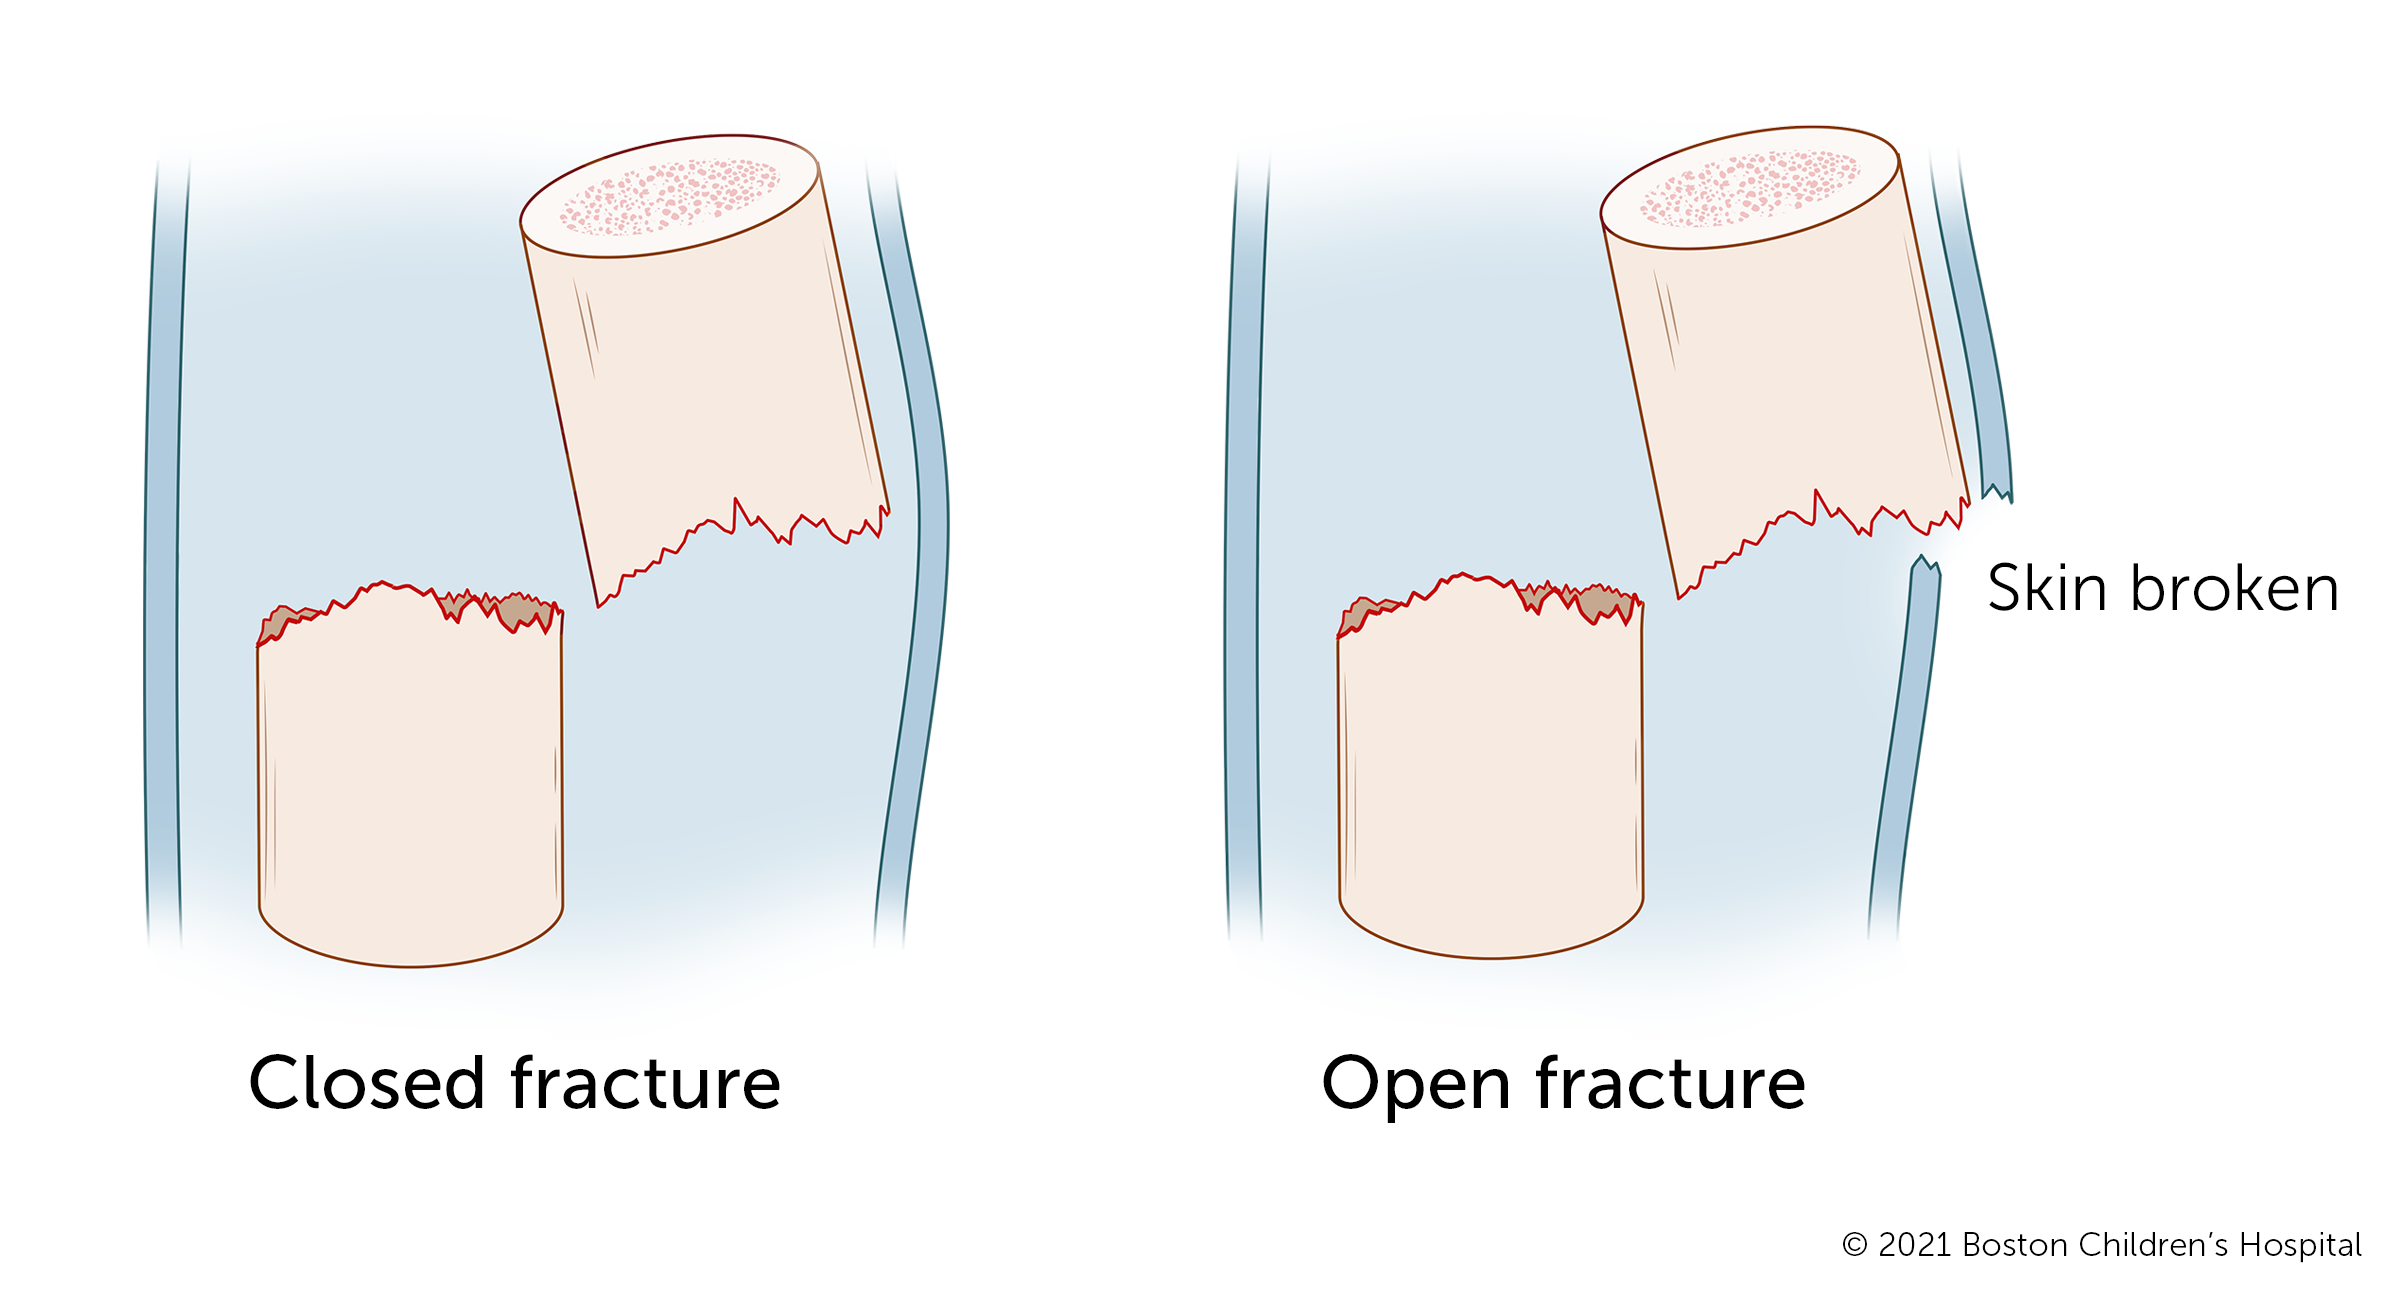 An illustration of open and closed fractures